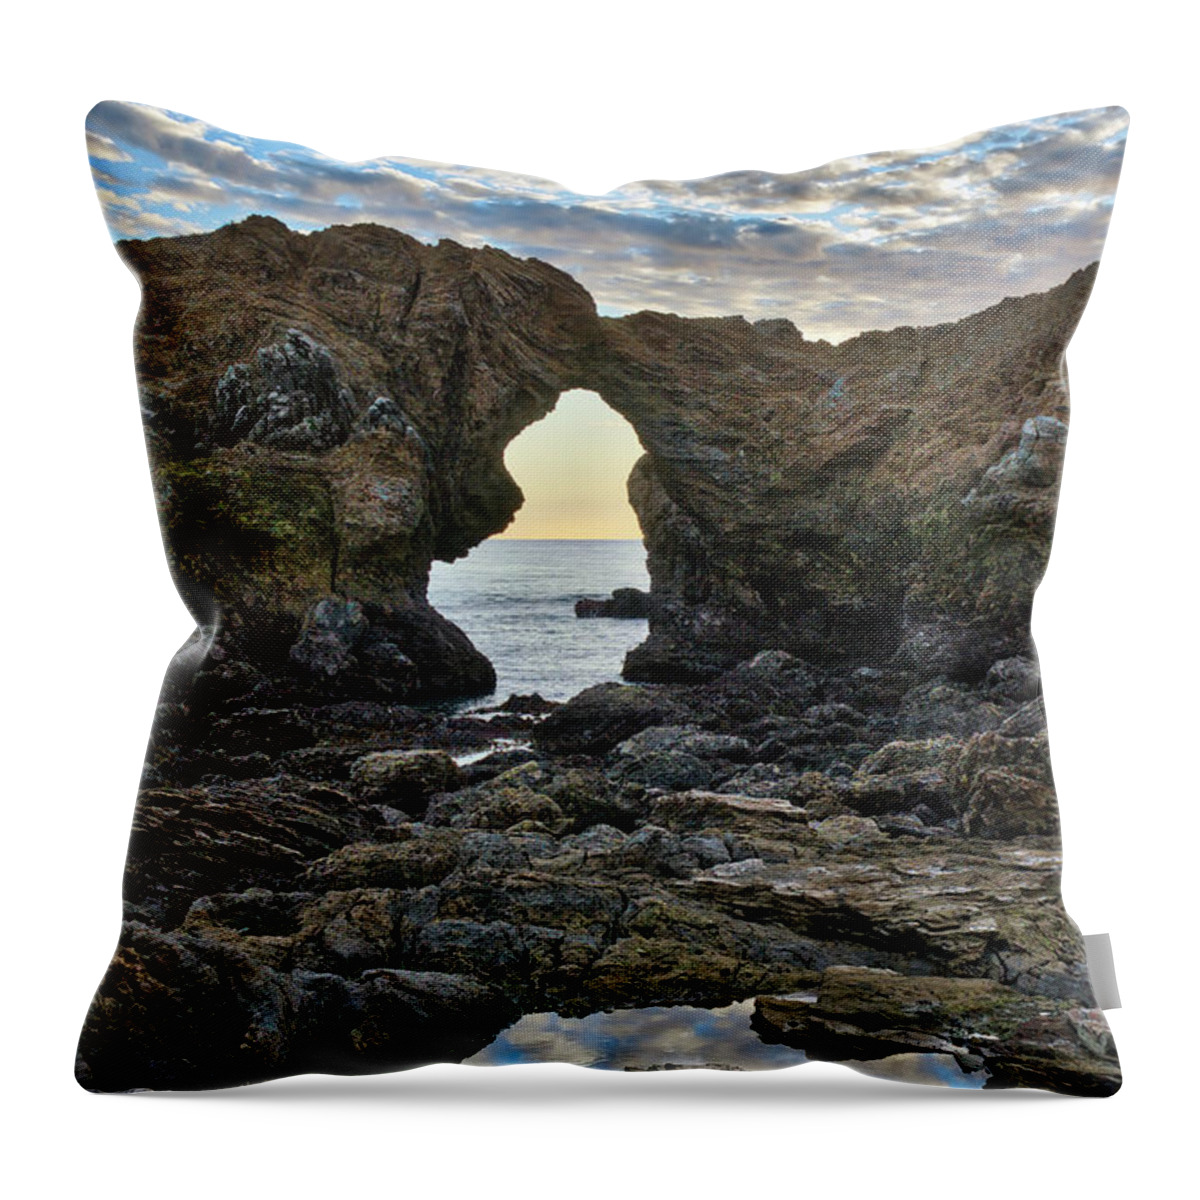 Reflections Throw Pillow featuring the photograph Reflections At Ladder Rock by Eddie Yerkish